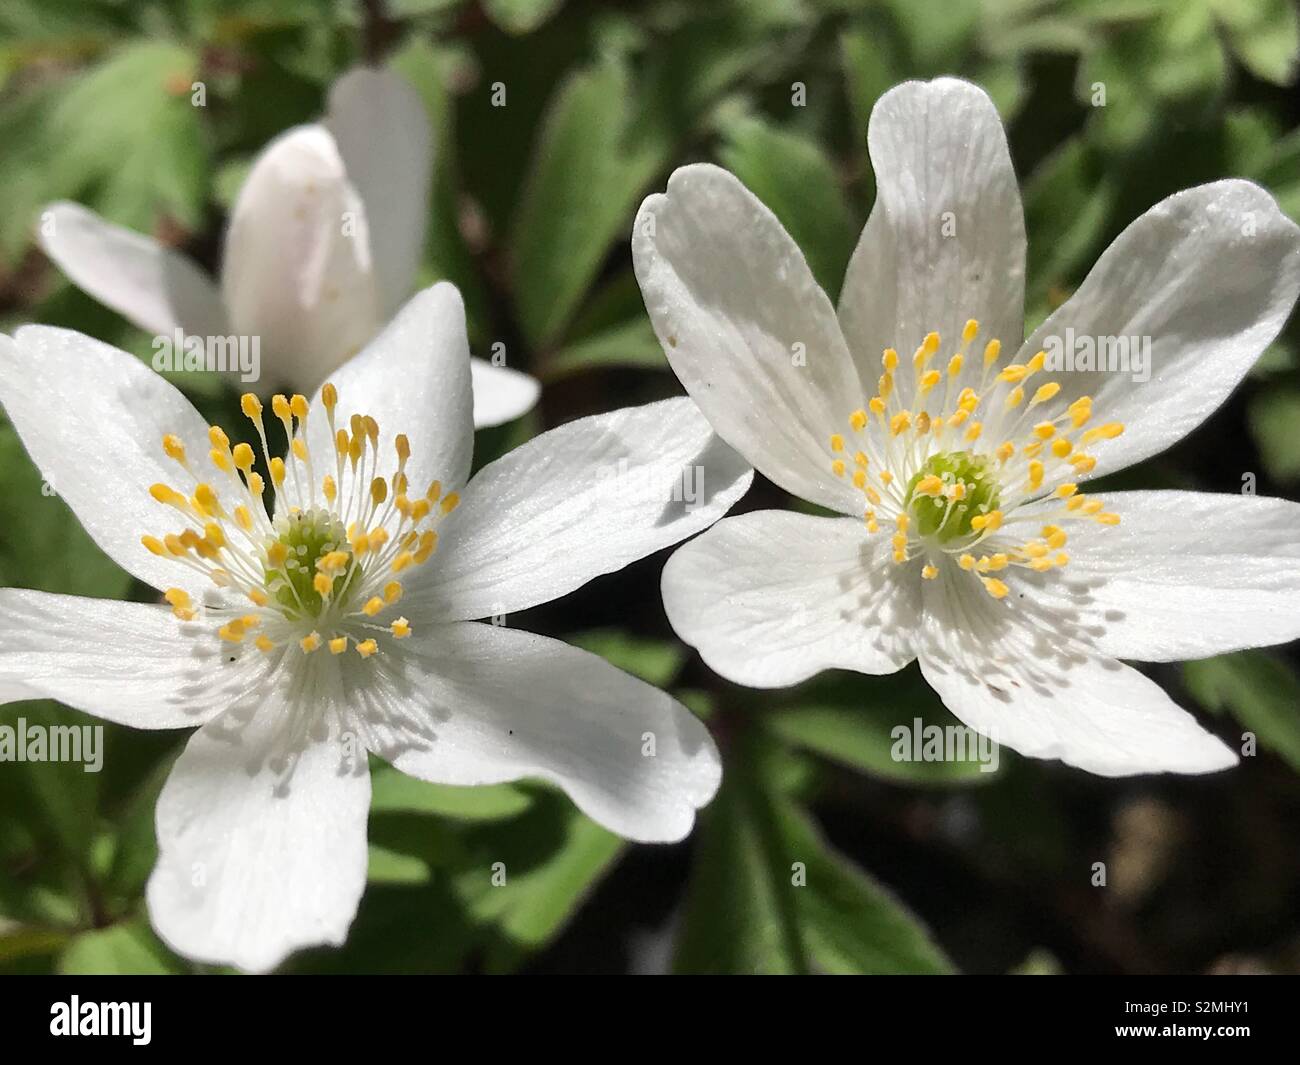 Wood Anemone Flowers - Anemone Nemorosa - First spring flowers blooming in a forest Stock Photo